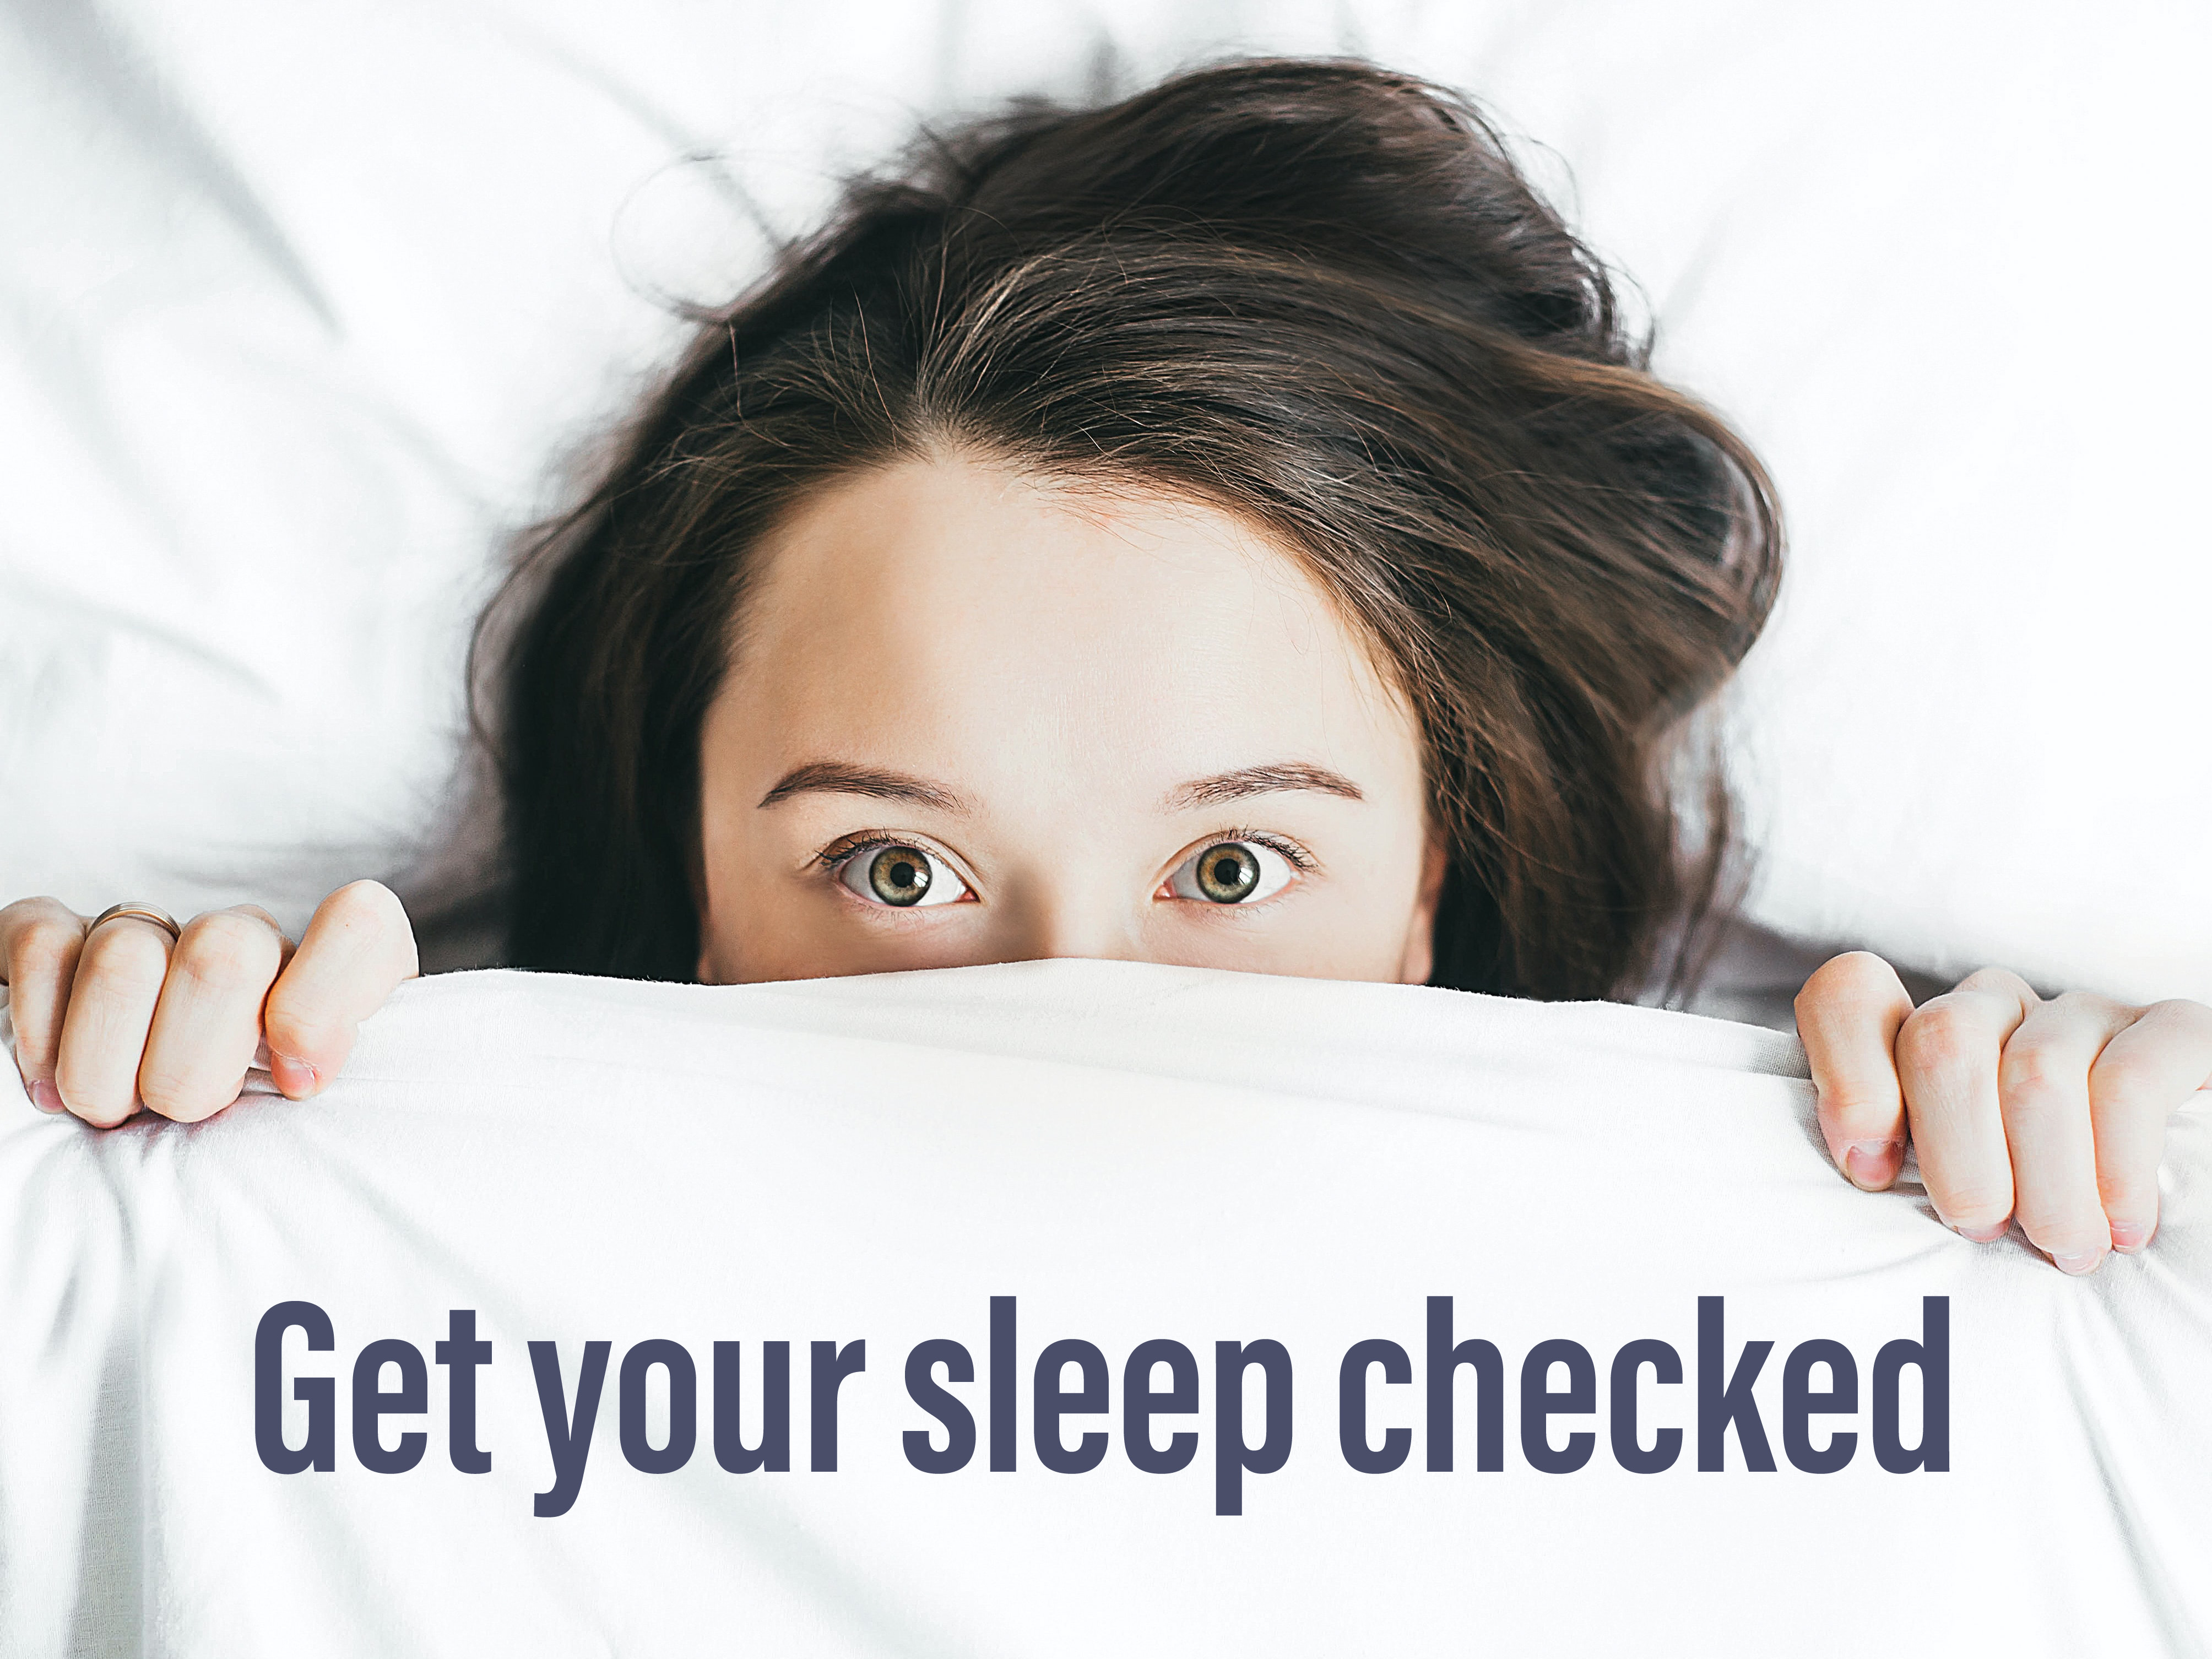 Why you should get your sleep checked